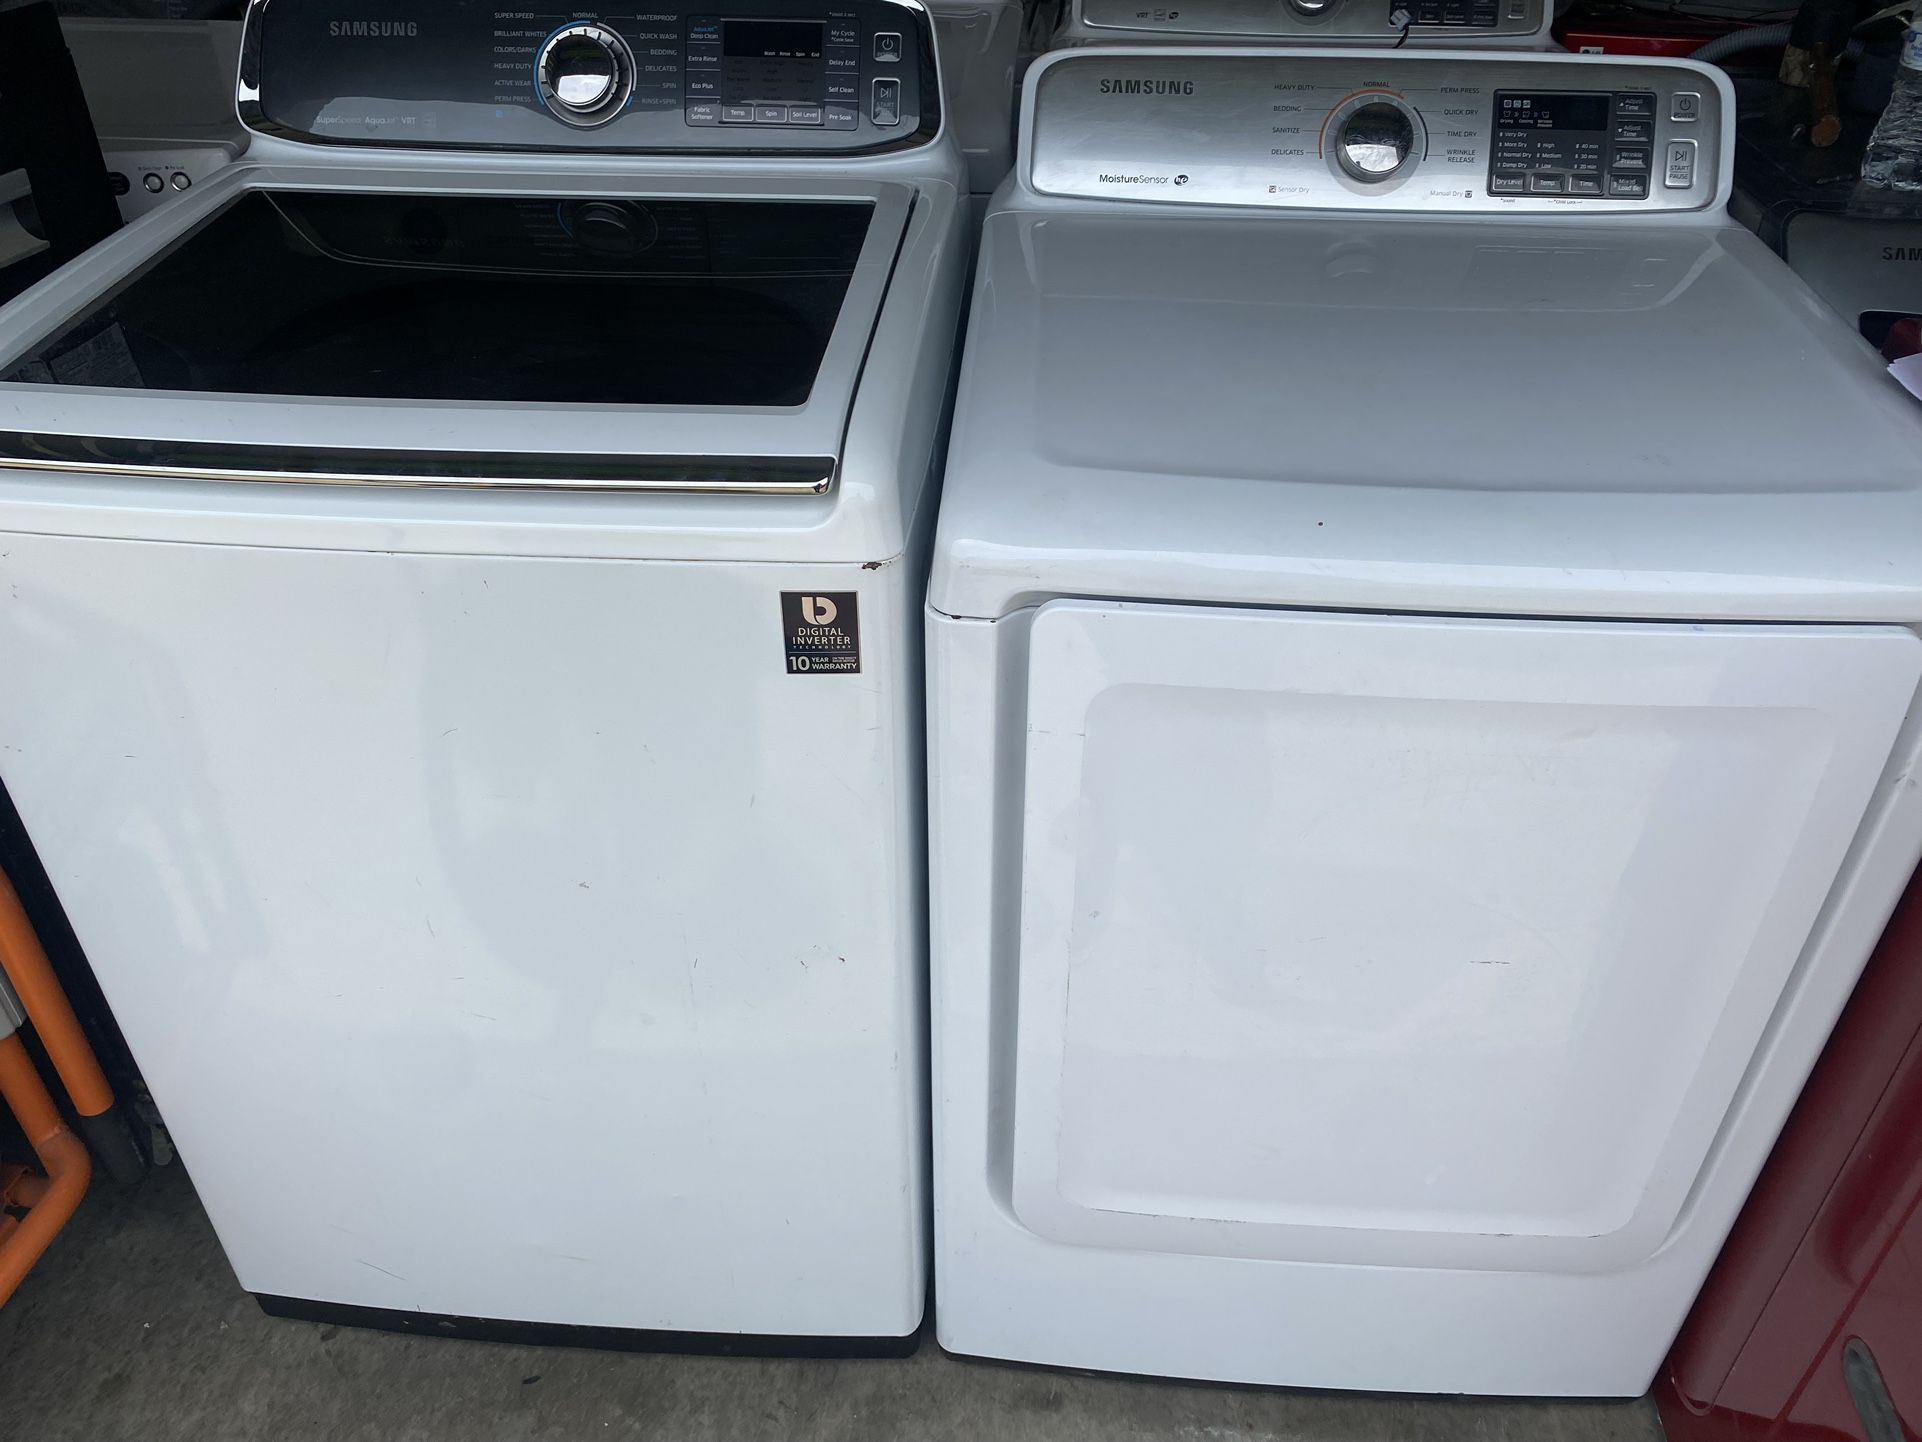 Washer And Dryer Will Deliver For 50. 